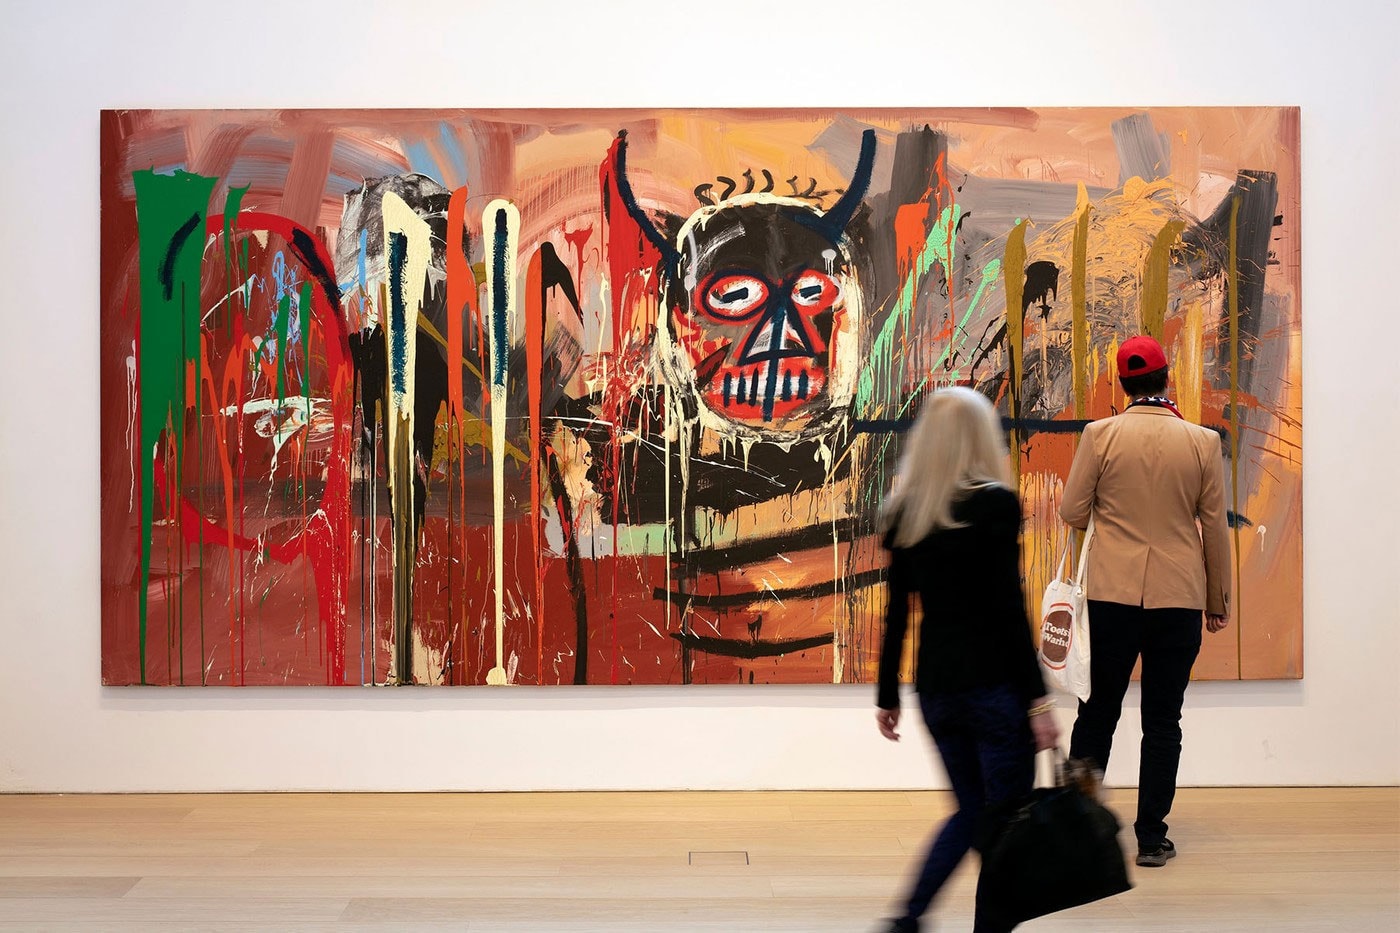 Jean michel basquiat untitled 1982 painting sells for 85 million usd phillips auction 70 million estimate horned devil acrylic spray paint canvas  third highest price paid taiwan news